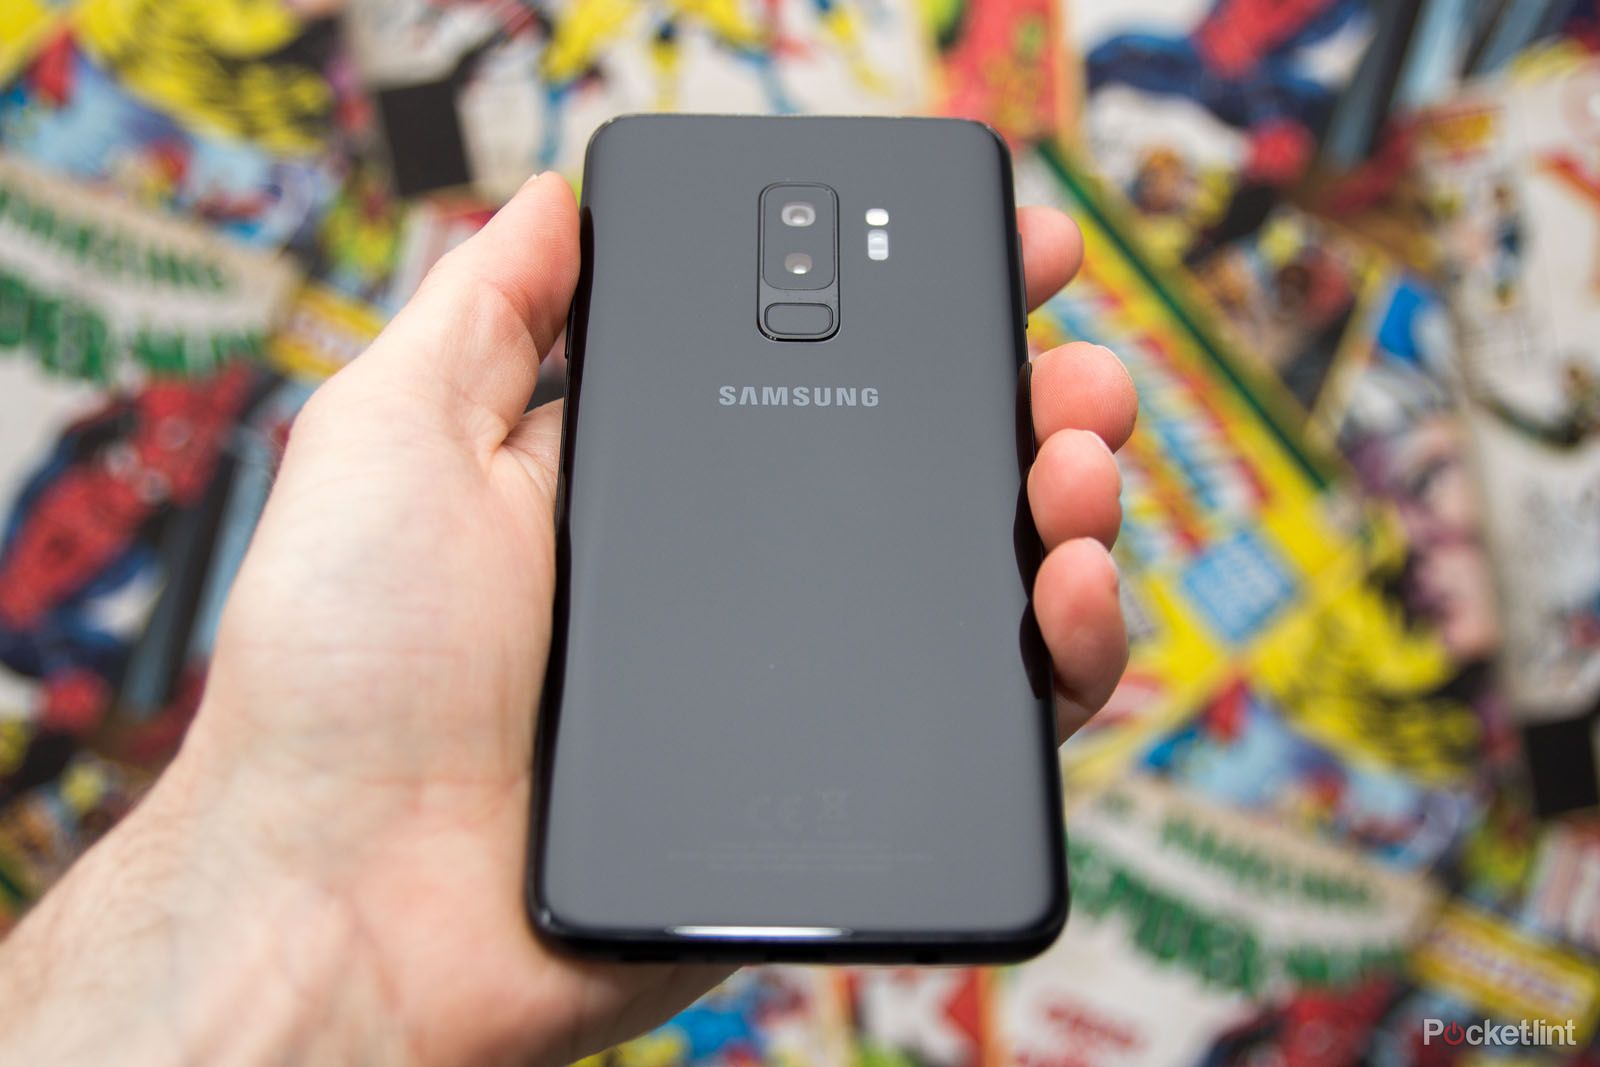 Samsung Galaxy S10 to have 5G support image 1